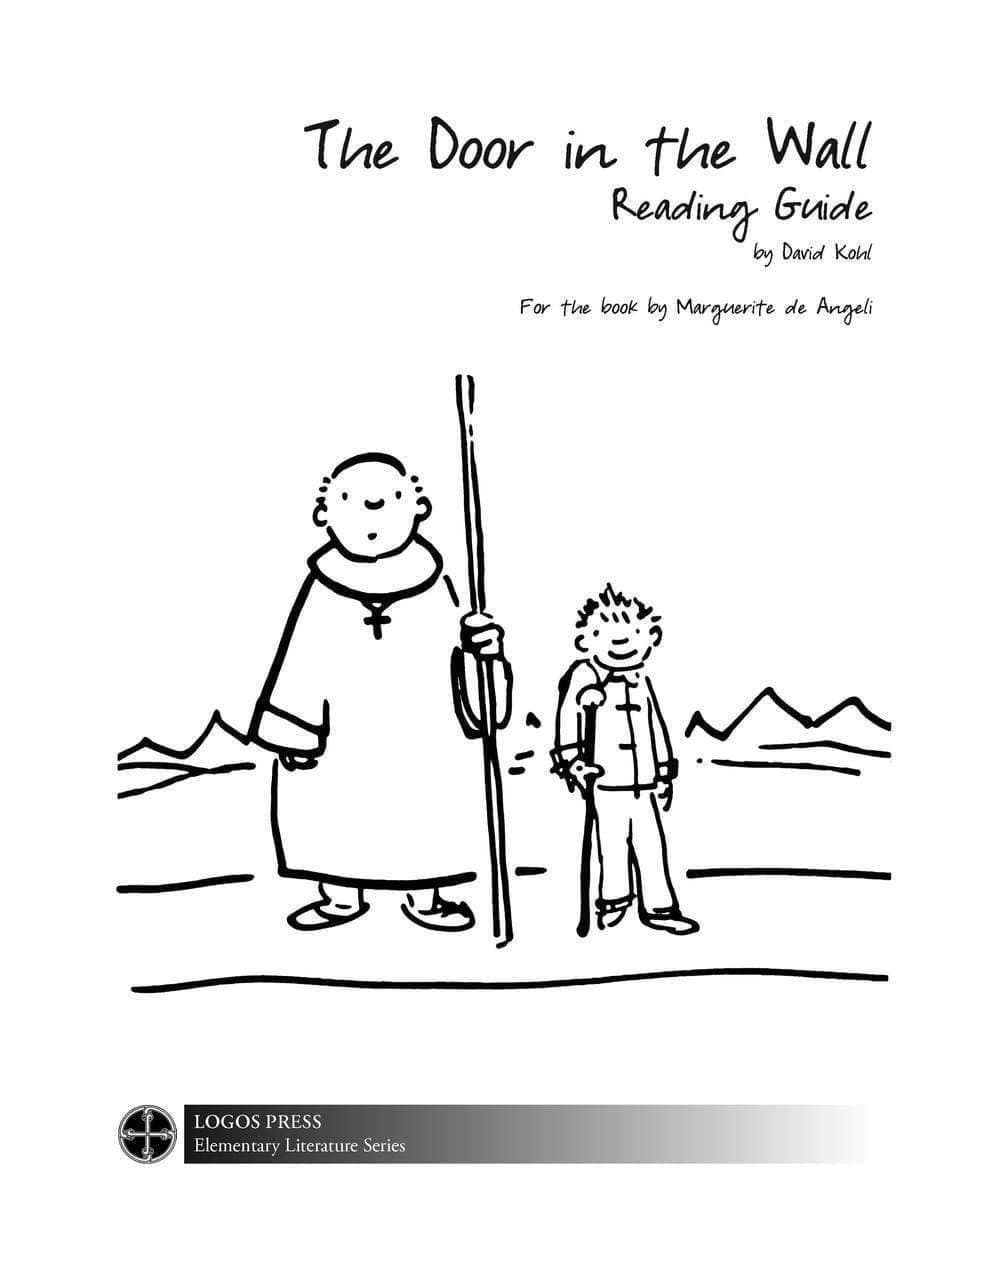 The Door in the Wall - Reading Guide (Download)